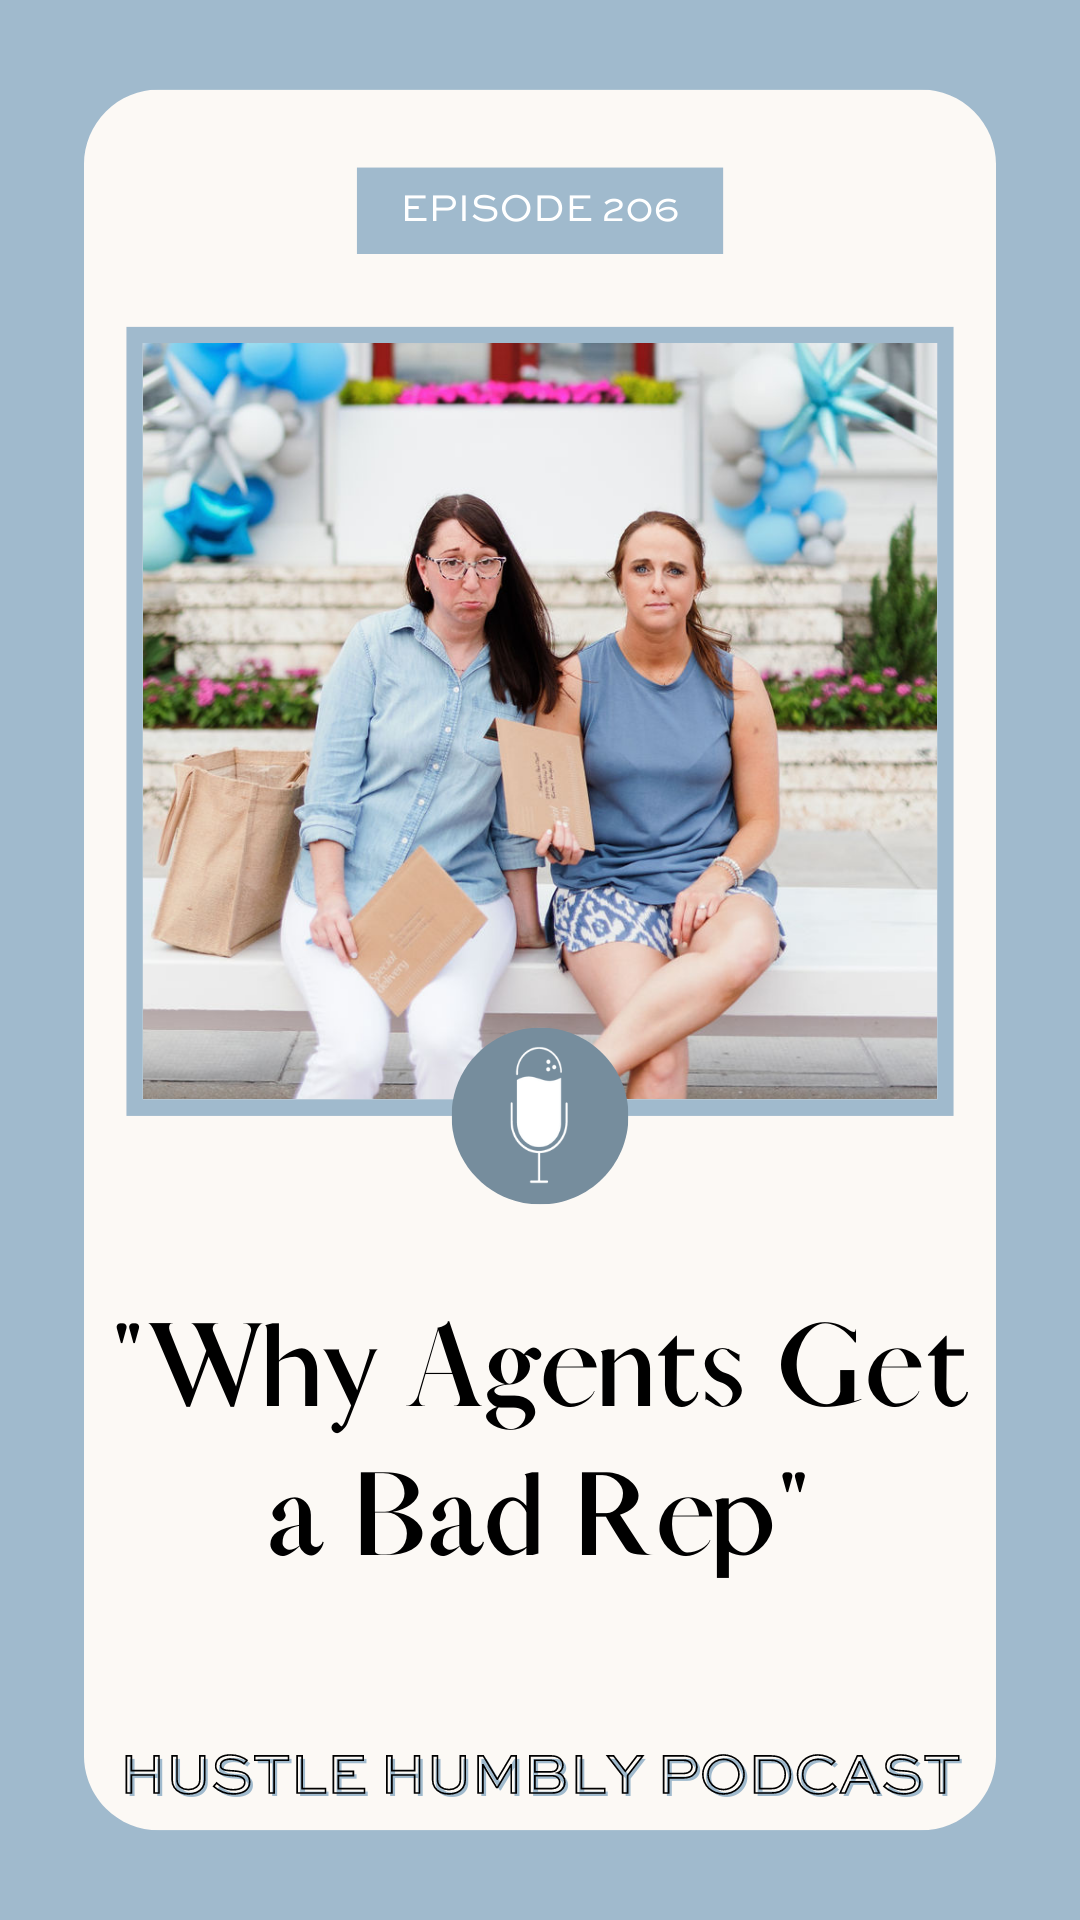 Alissa and Katy discuss the reasons why real estate agents have a bad reputation and how to improve professionalism in the industry.